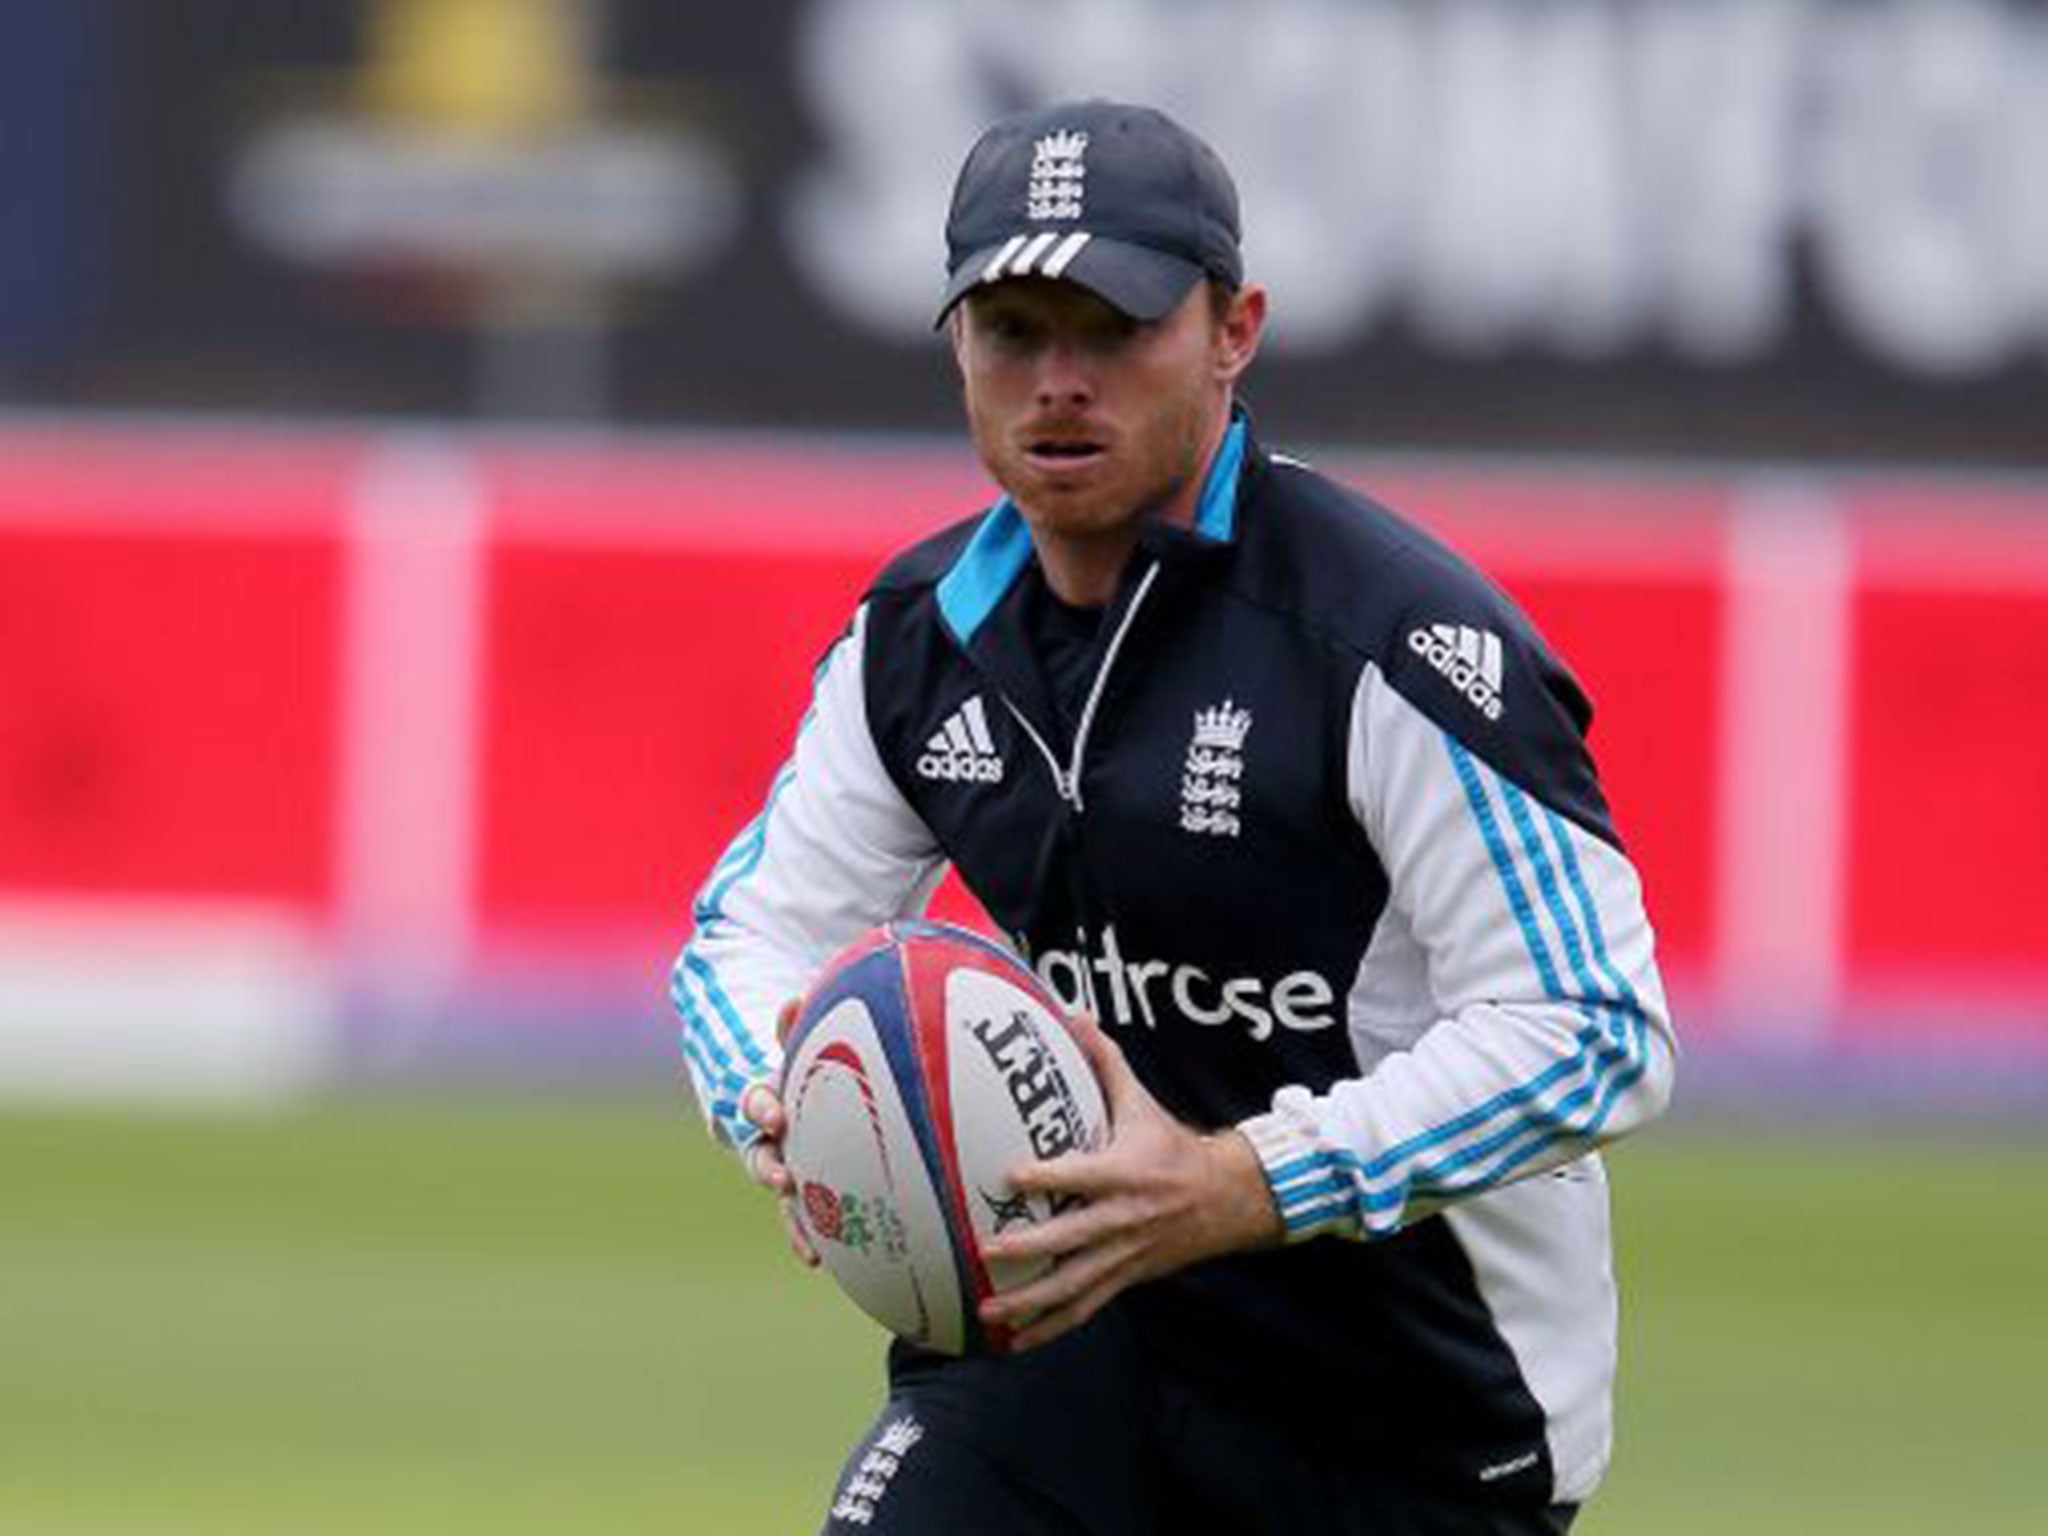 Ian Bell is England’s most experienced player but that may not save him from the axe